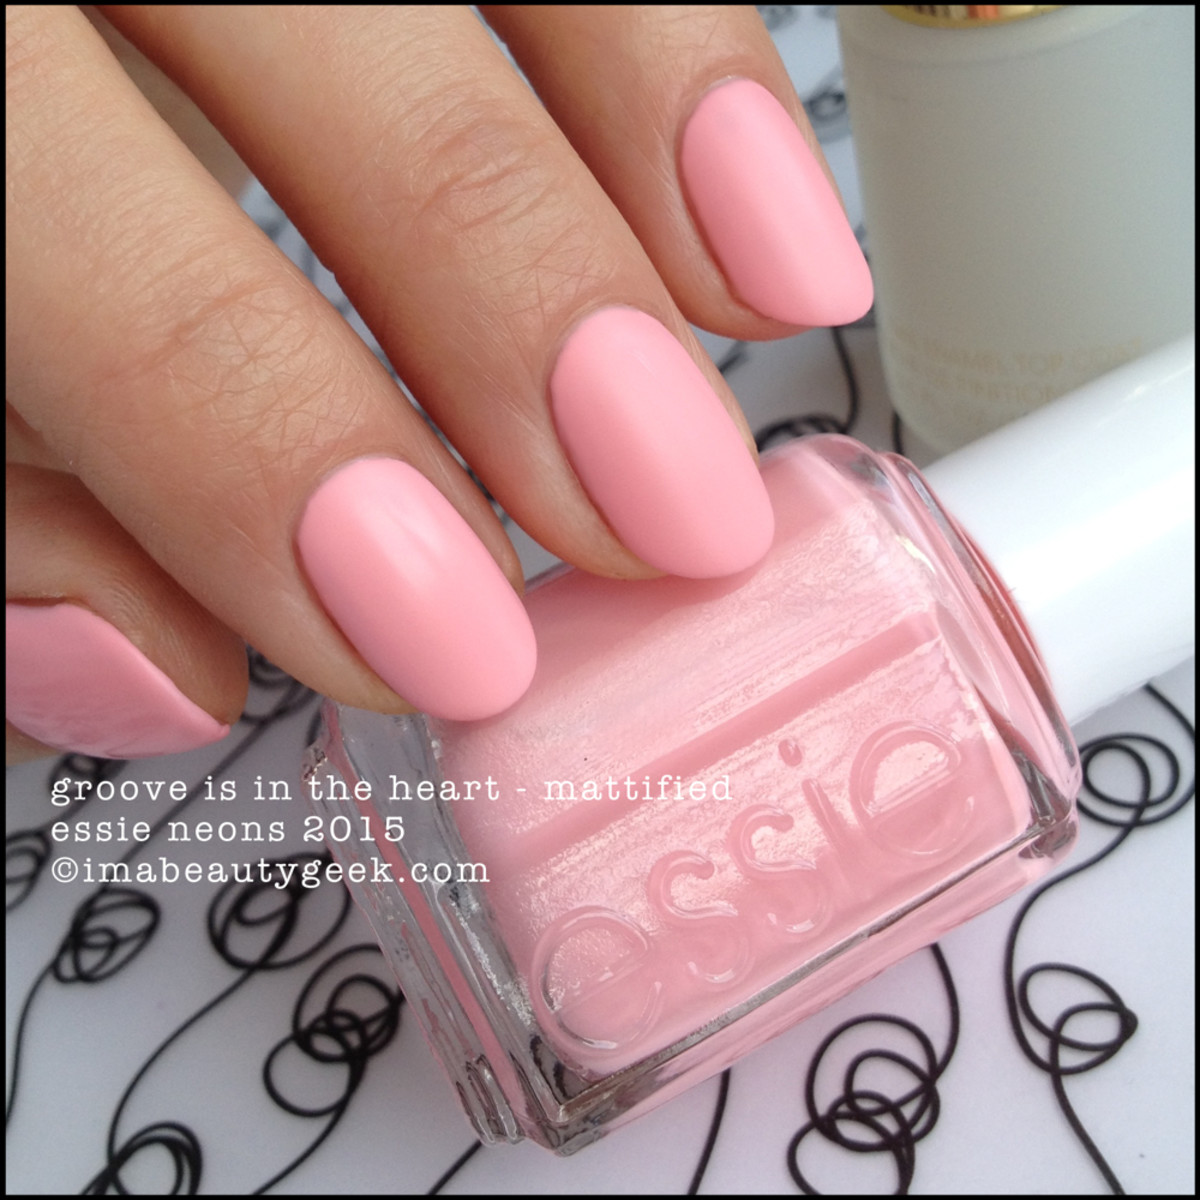 Essie Neon 2015 Collection_Essie Groove is in the Heart Neons